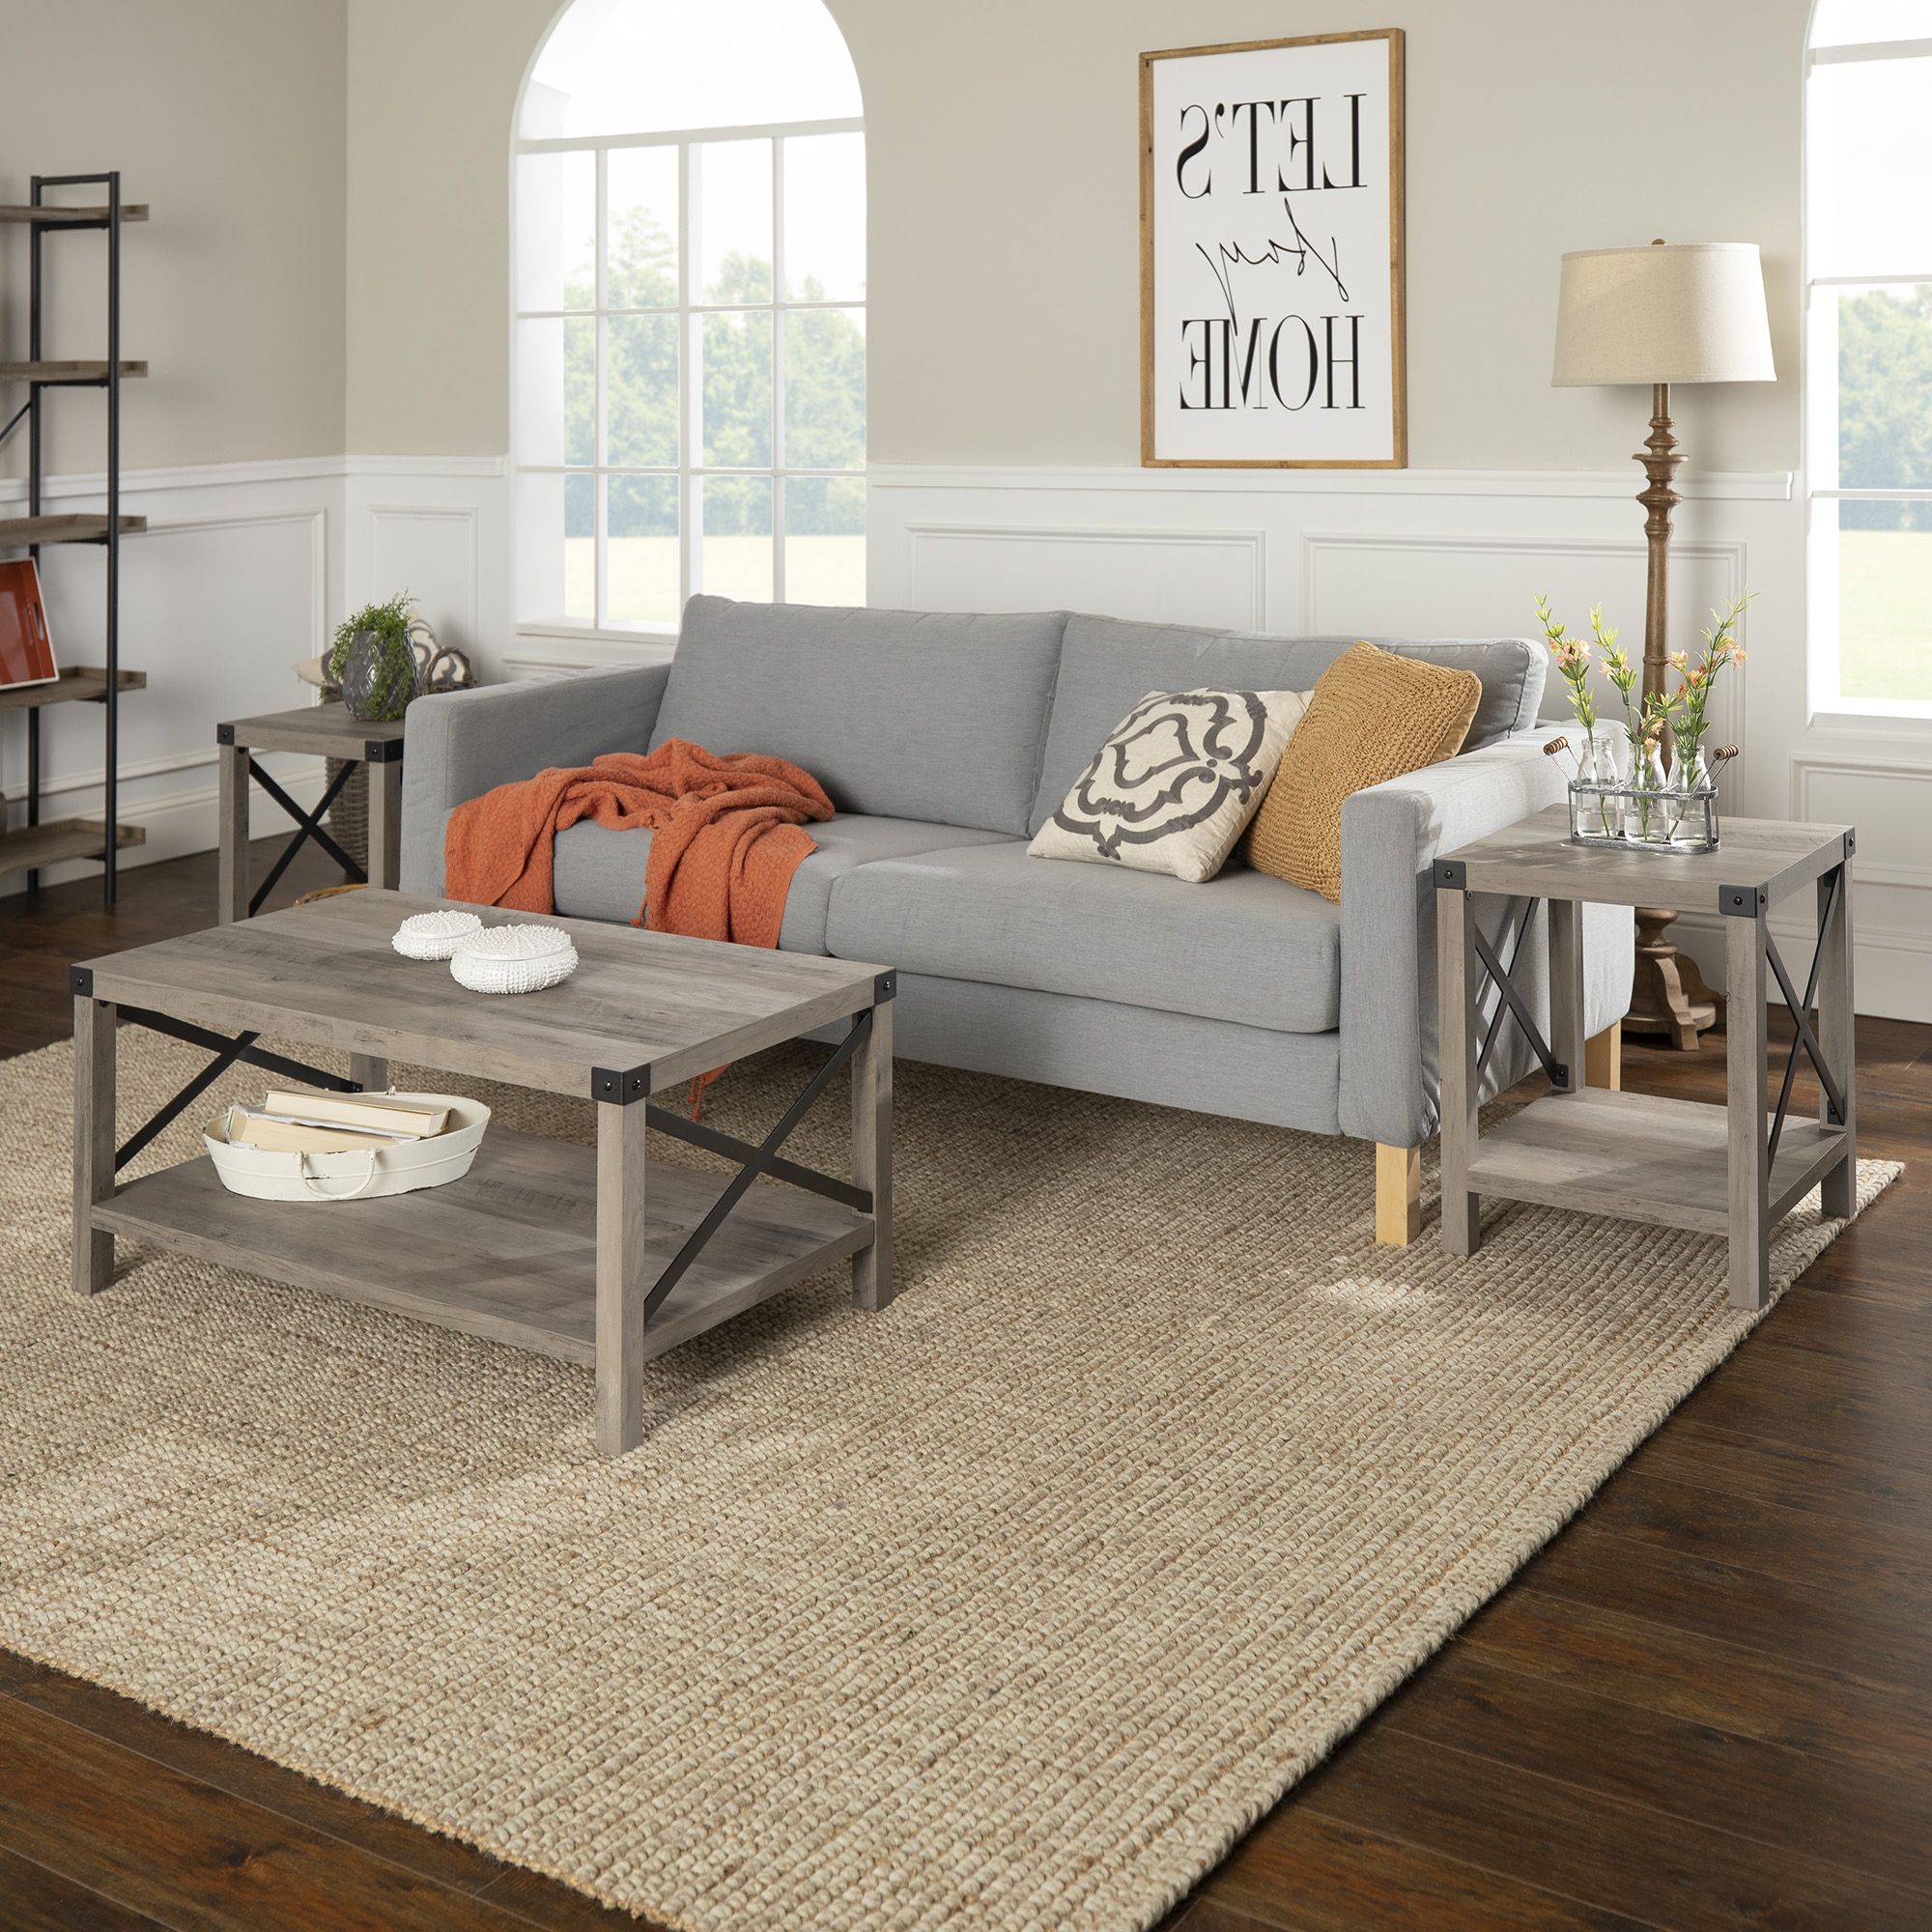 Gray Wash Coffee Tables Throughout Best And Newest Manor Park 3 Piece Rustic Wood & Metal Coffee Table Set (View 6 of 20)